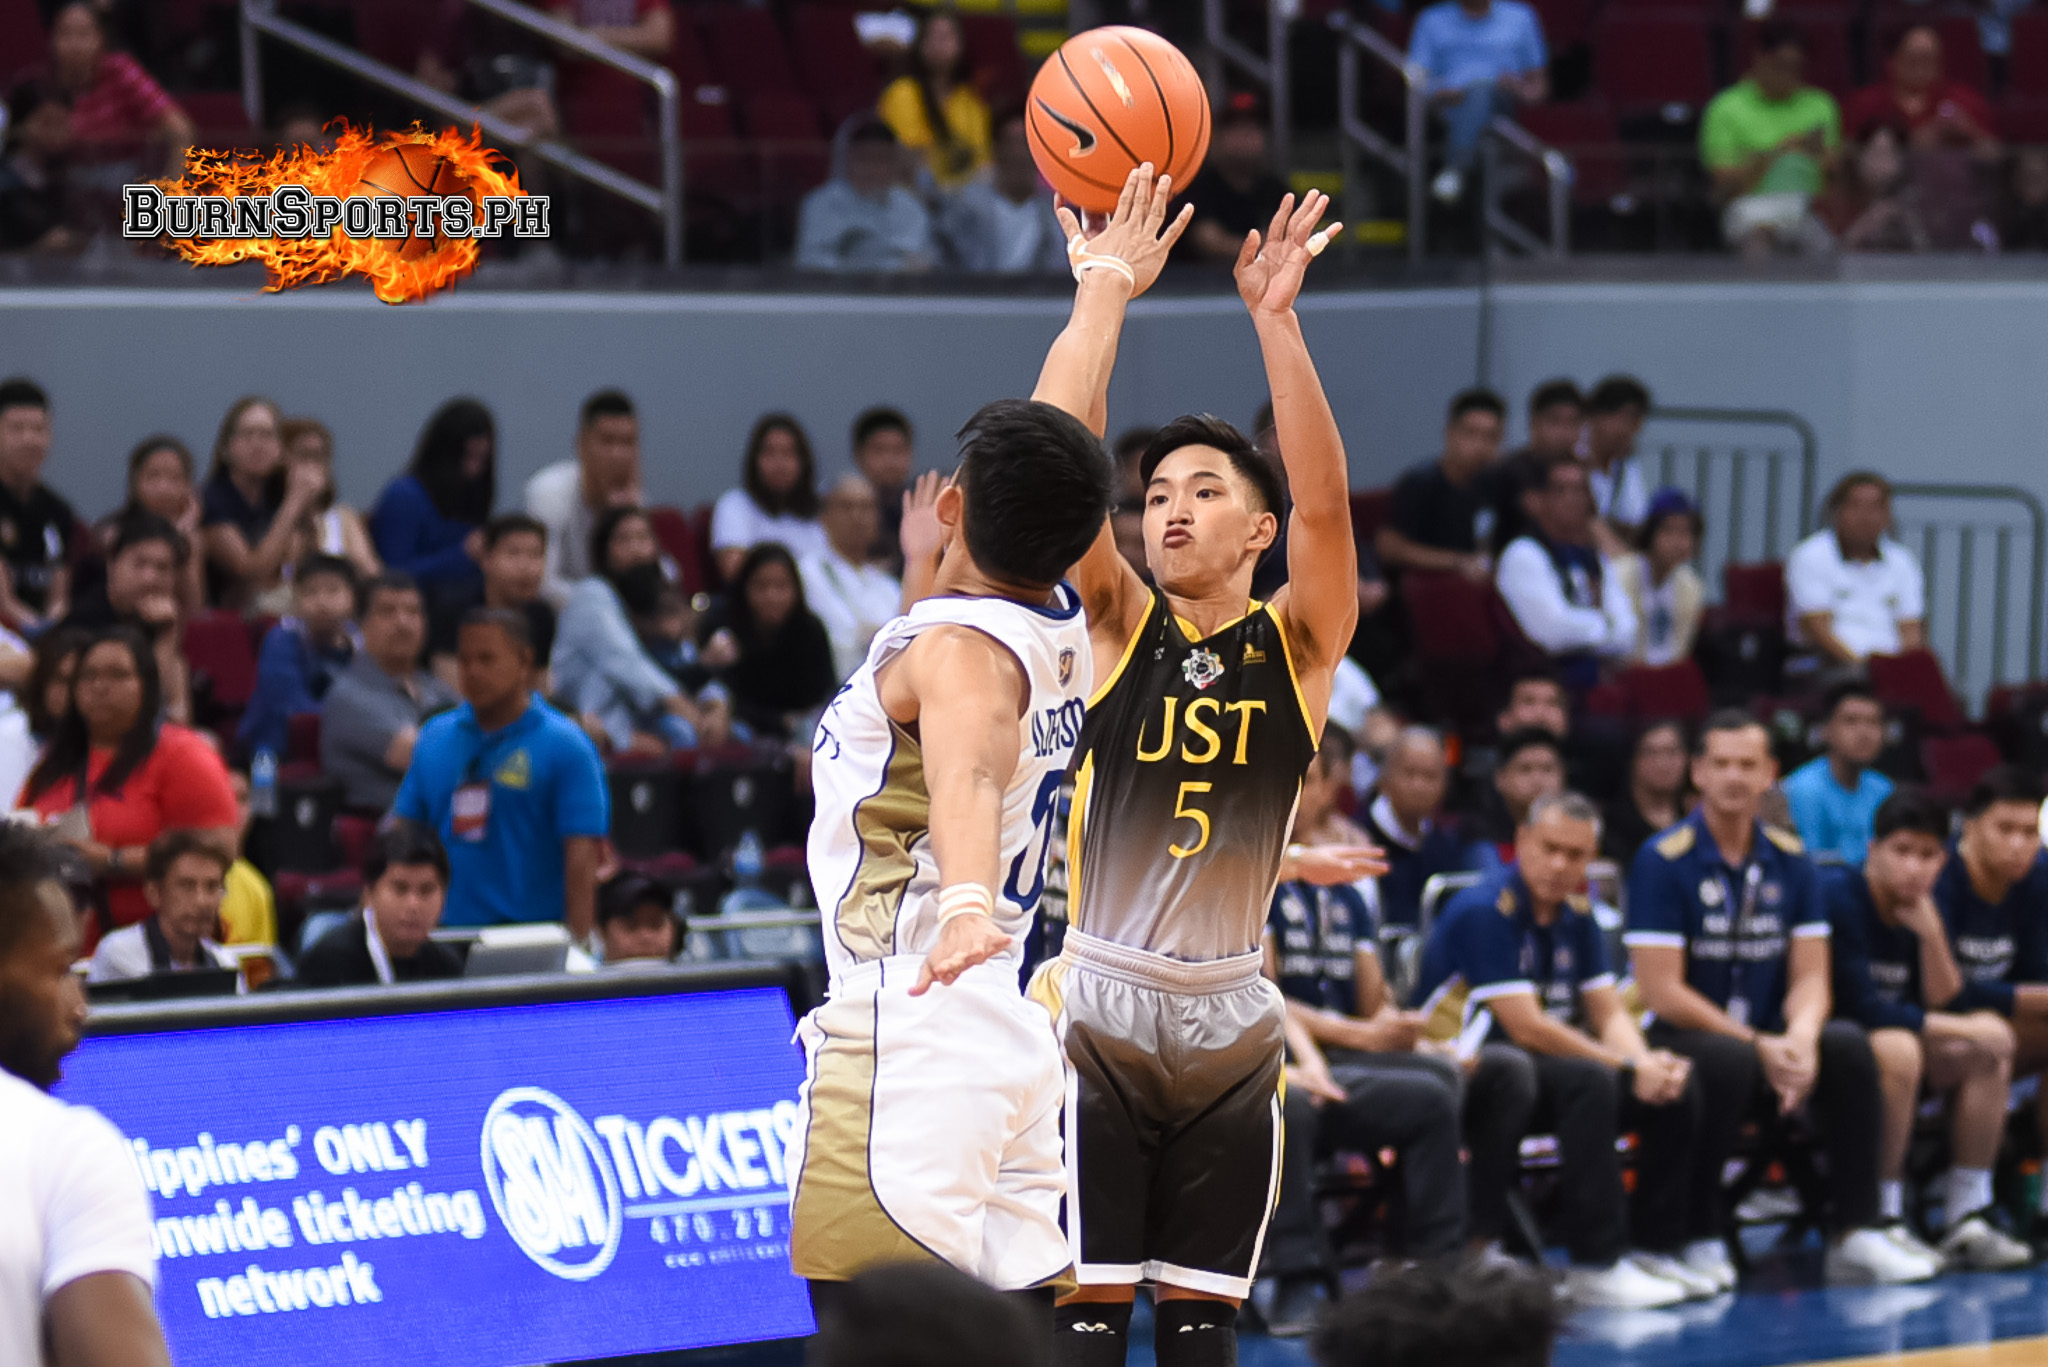 Subido, Lee dominate as UST gets first win under Ayo